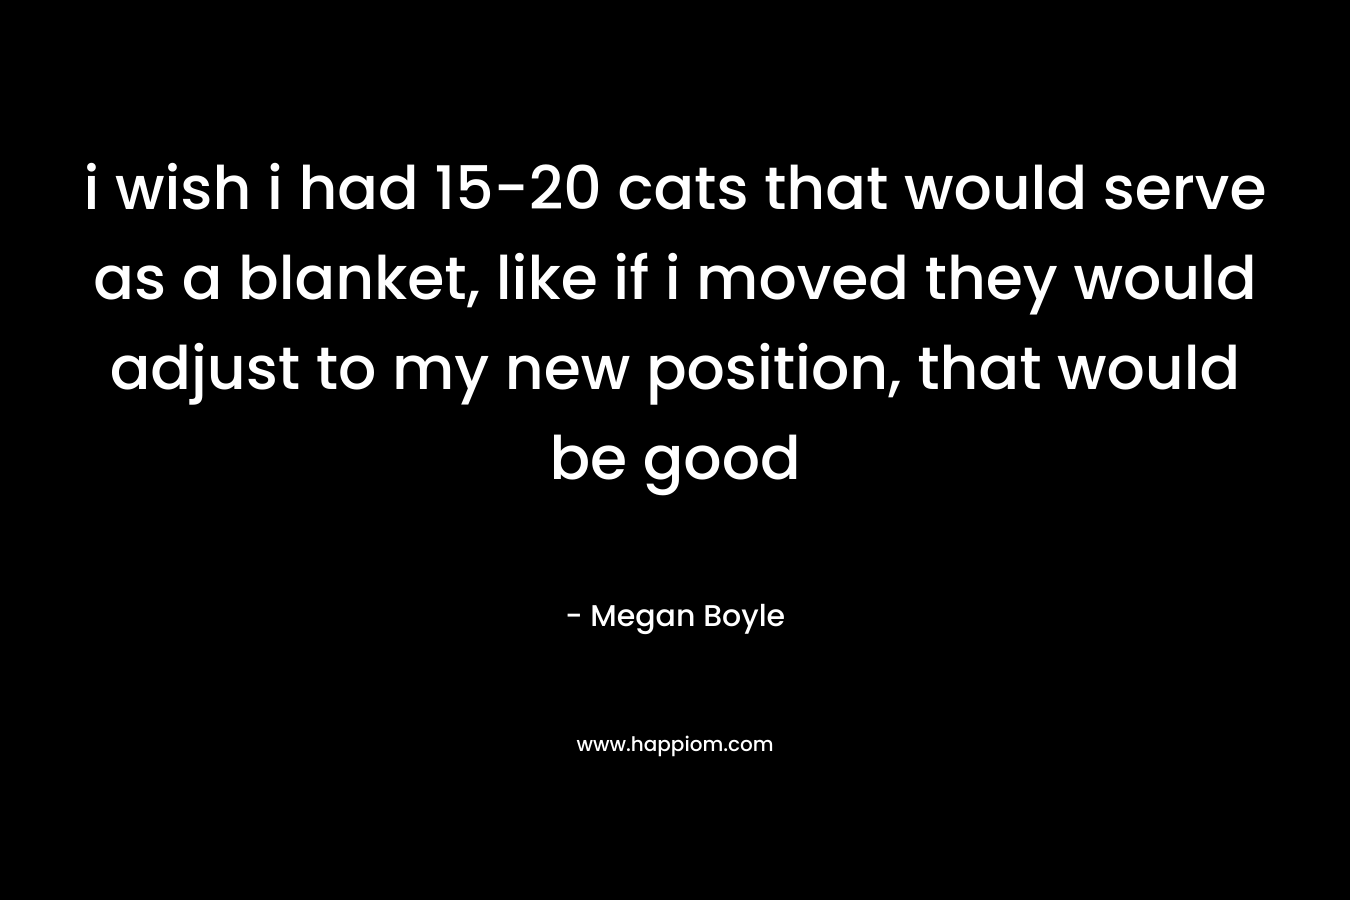 i wish i had 15-20 cats that would serve as a blanket, like if i moved they would adjust to my new position, that would be good